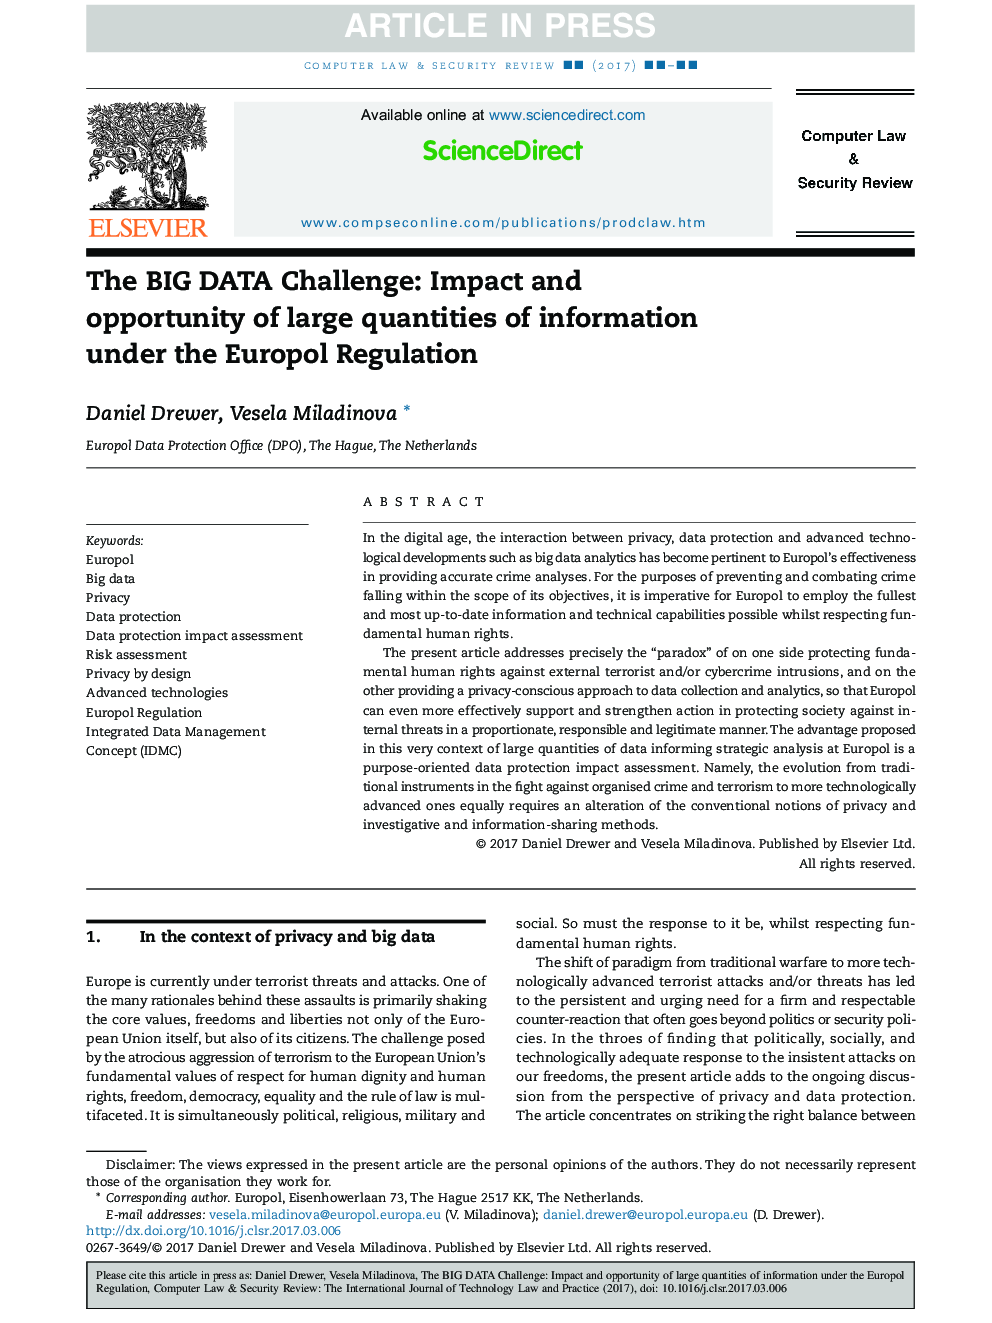 The BIG DATA Challenge: Impact and opportunity of large quantities of information under the Europol Regulation